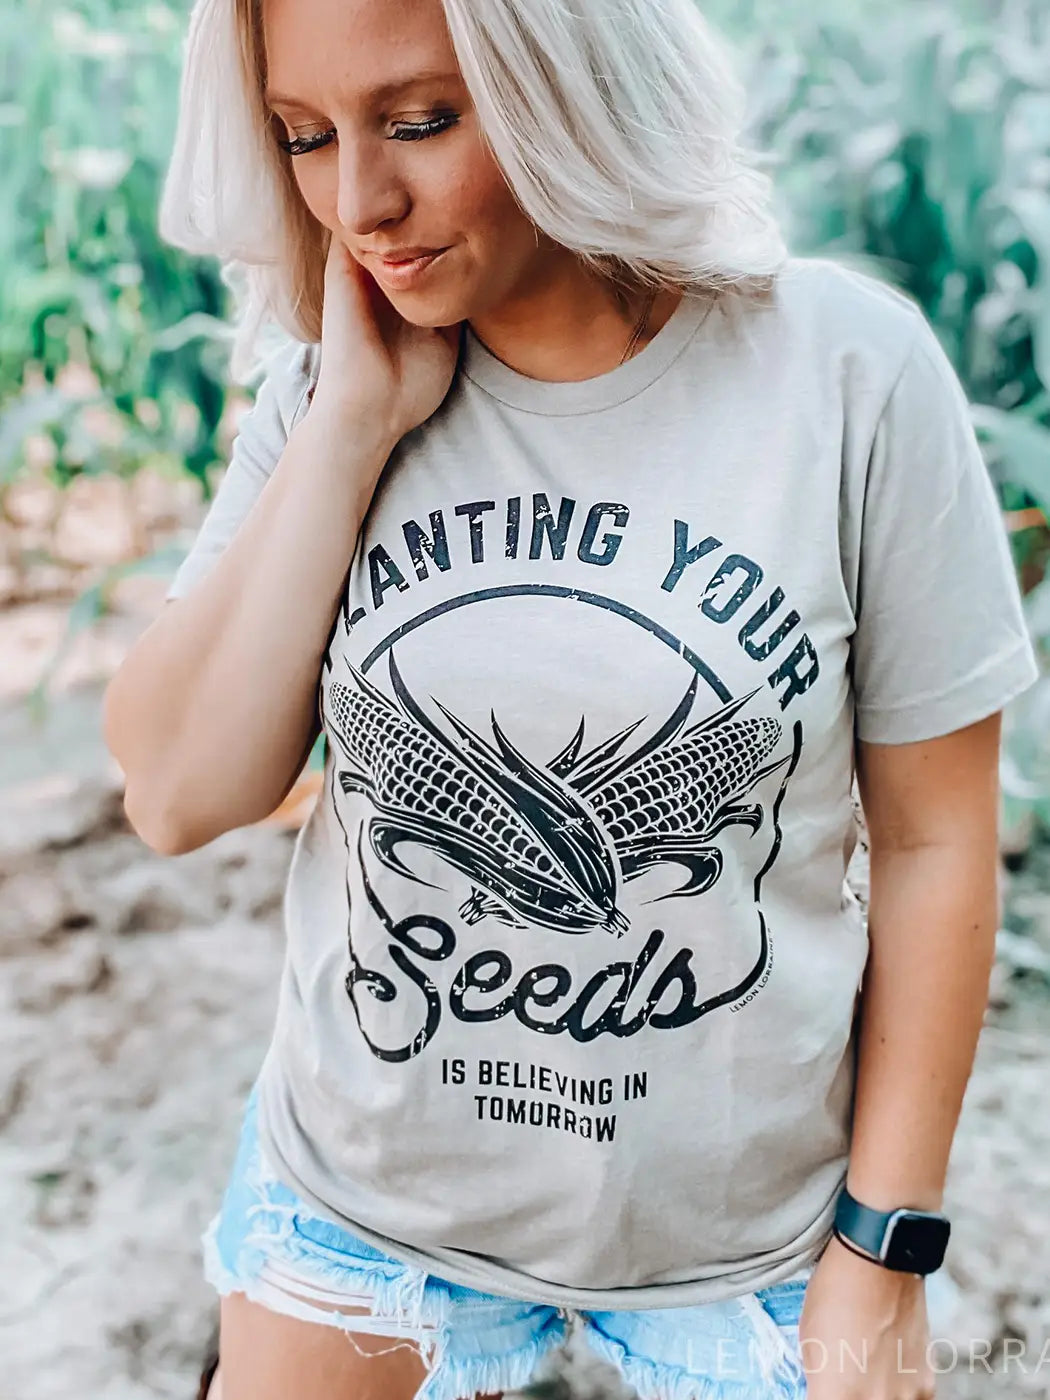 Preorder Planting your seeds